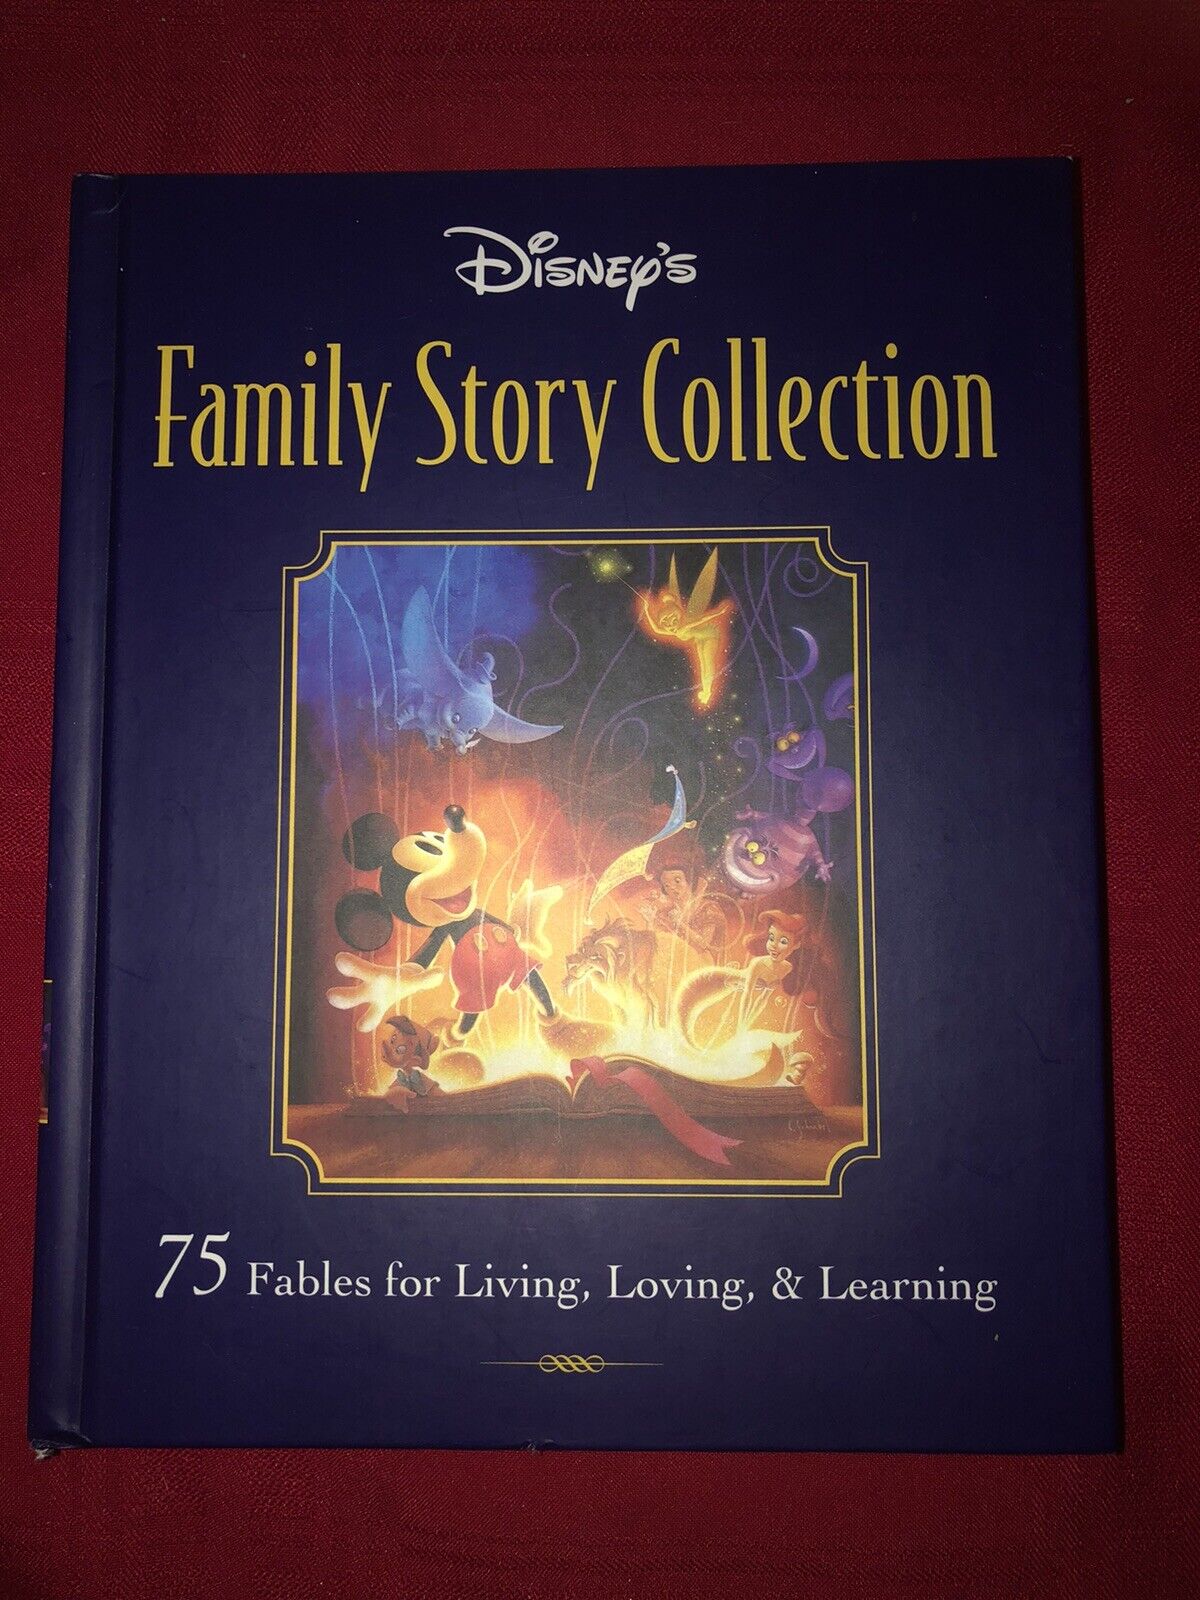 EUC 1998 DISNEYS FAMILY STORY COLLECTION HC BOOK 75 FABLES FIRST EDITION